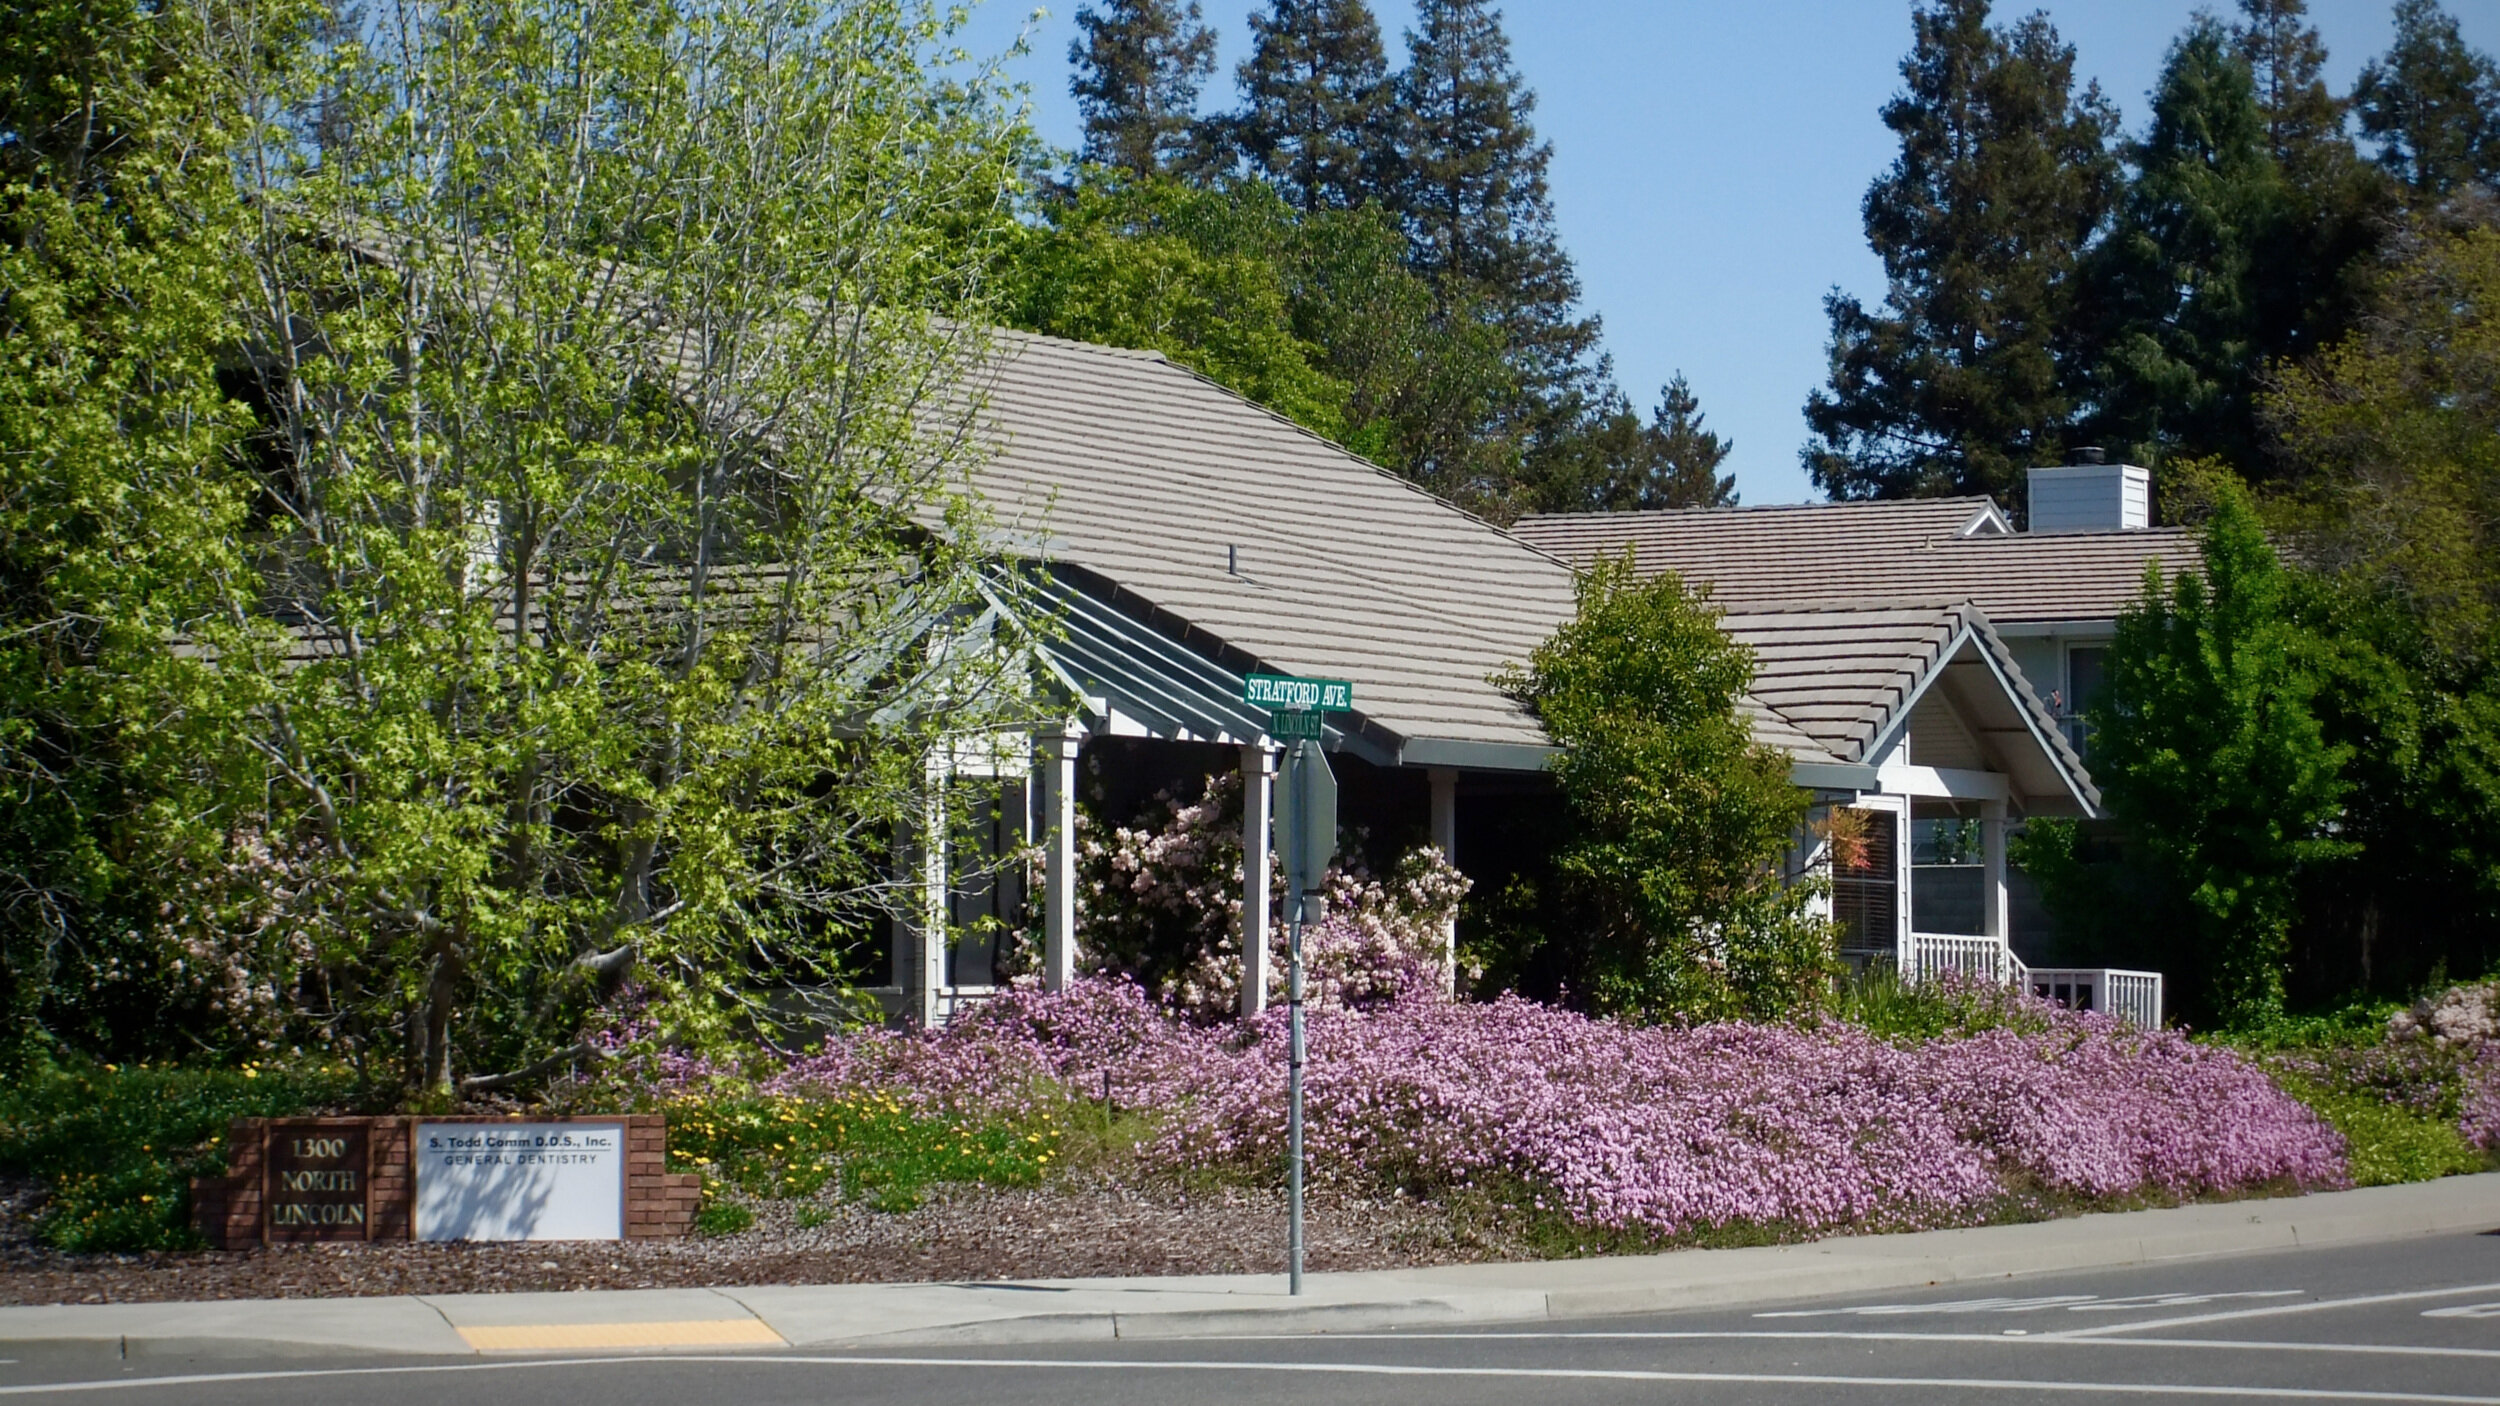 Photo of the office from across the street, in the Safeway parking lot